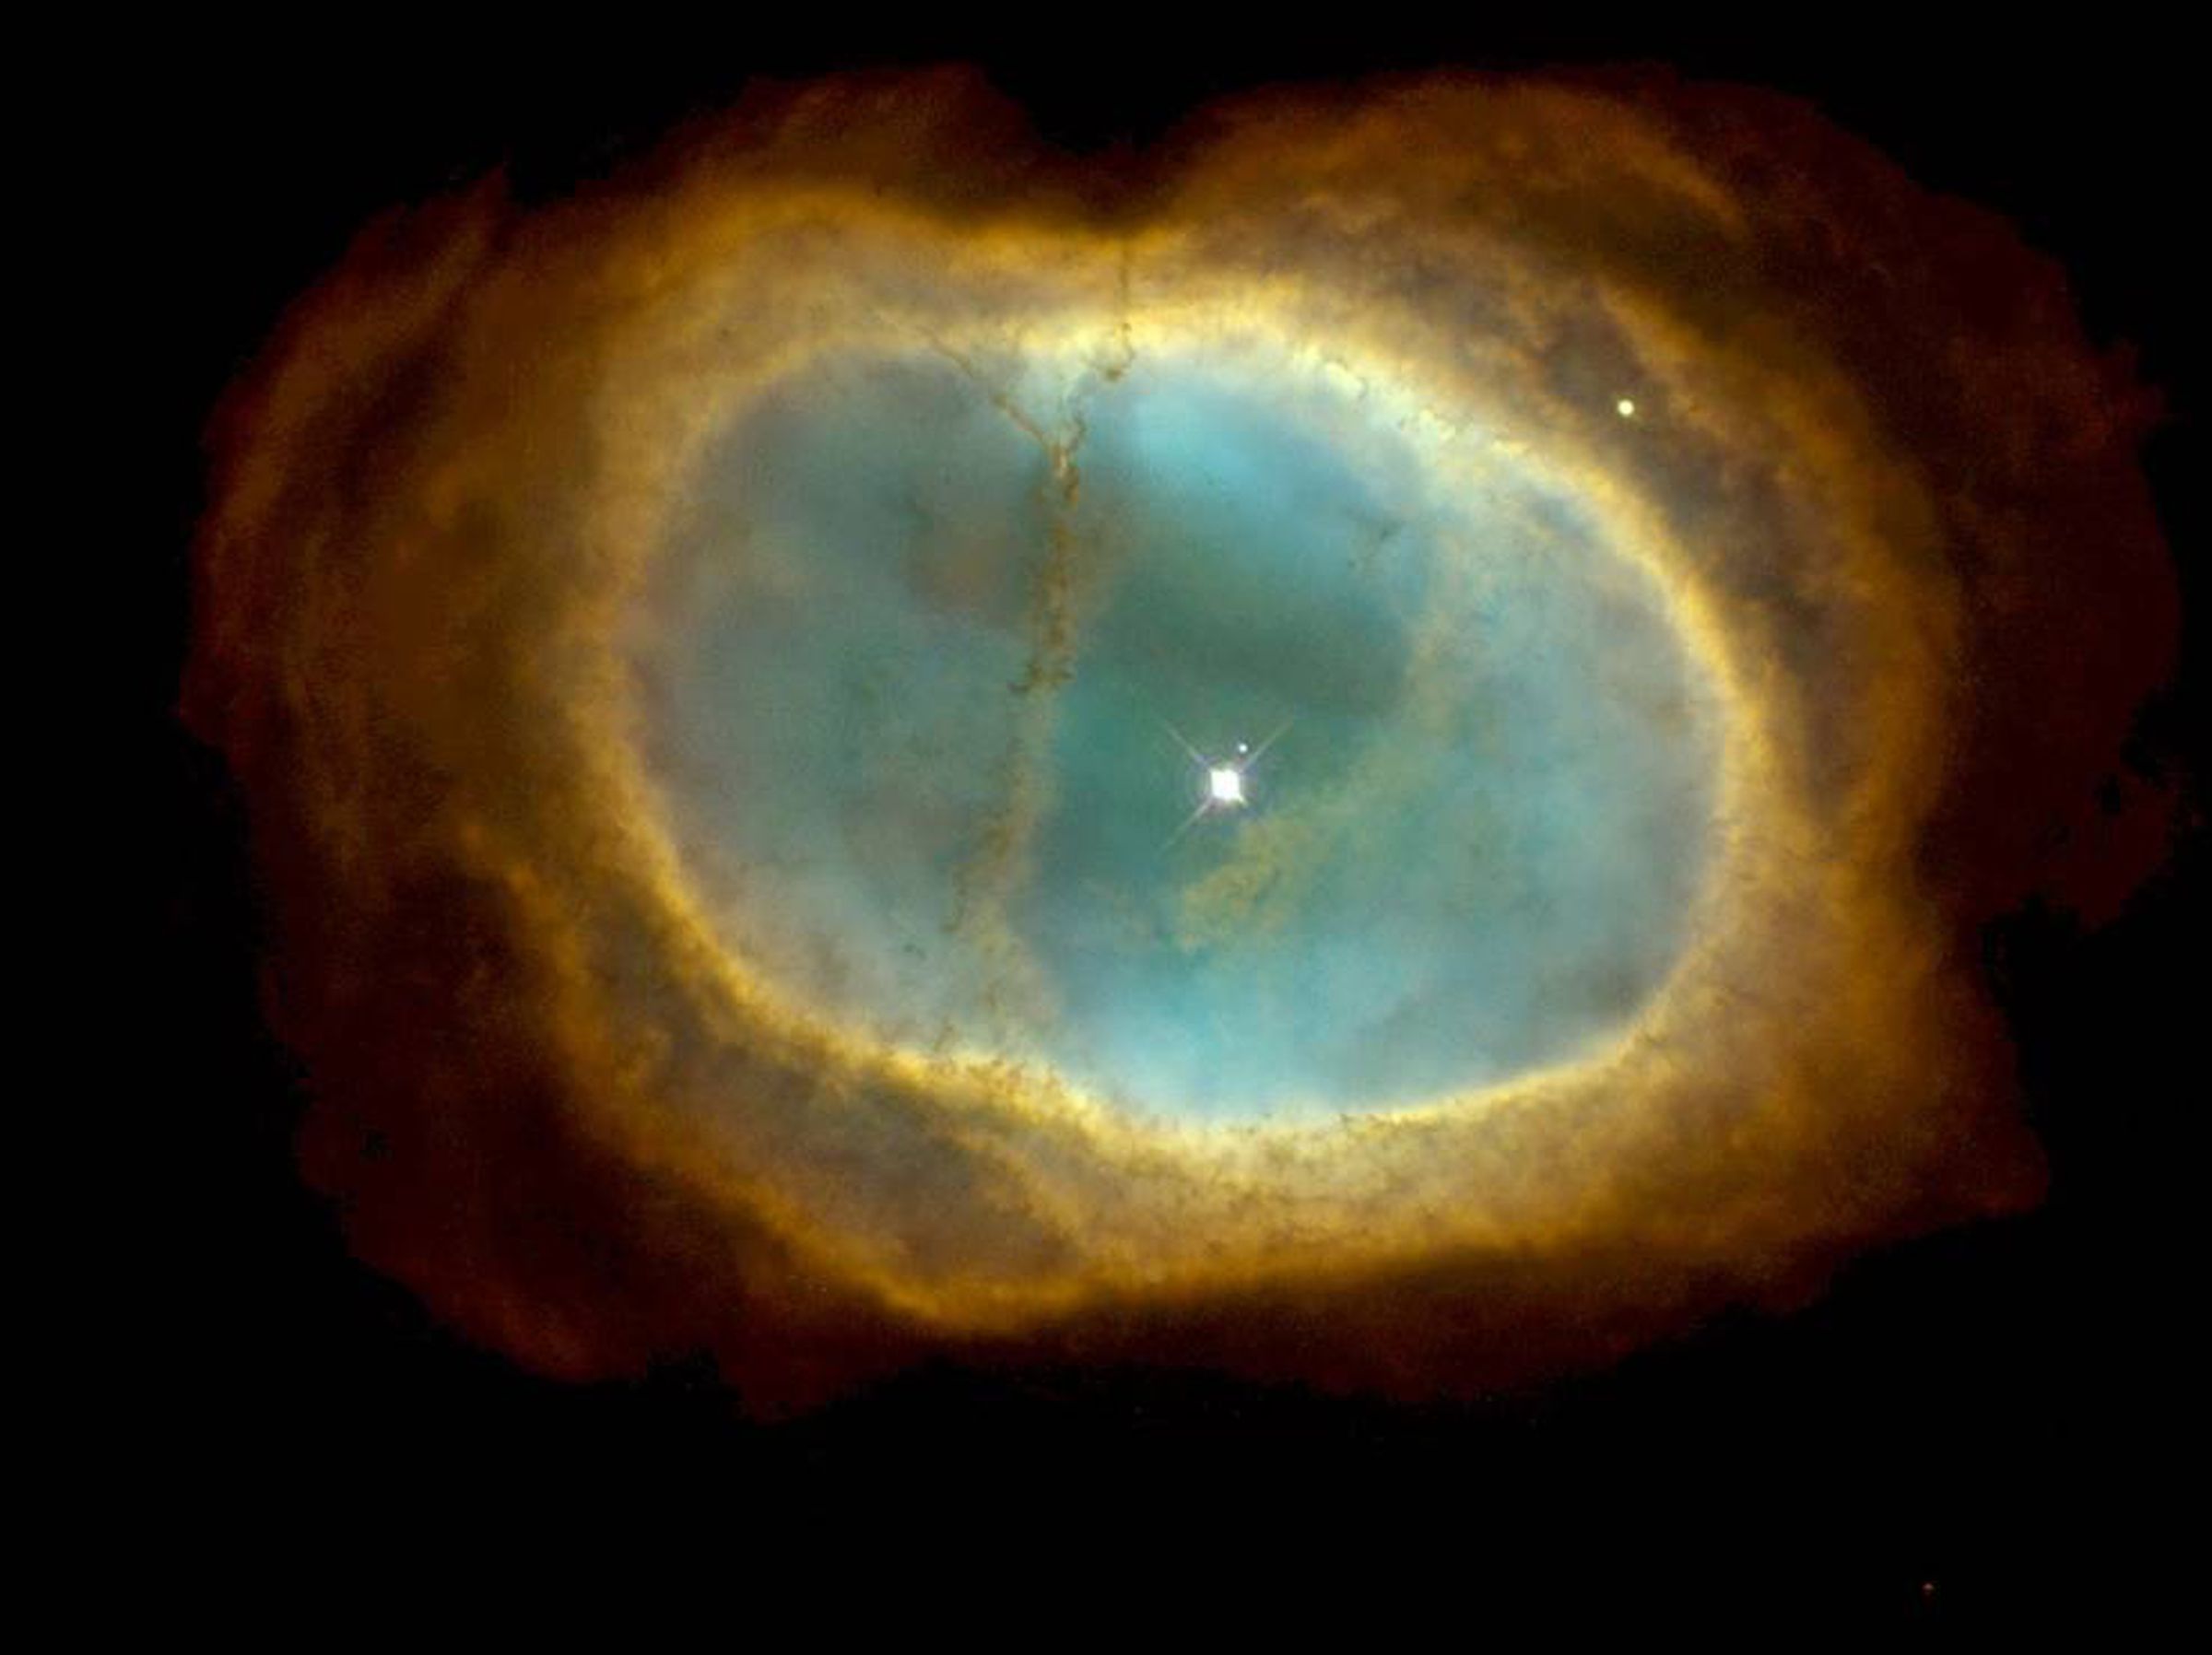 Southern Ring Nebula, as seen by Hubble.